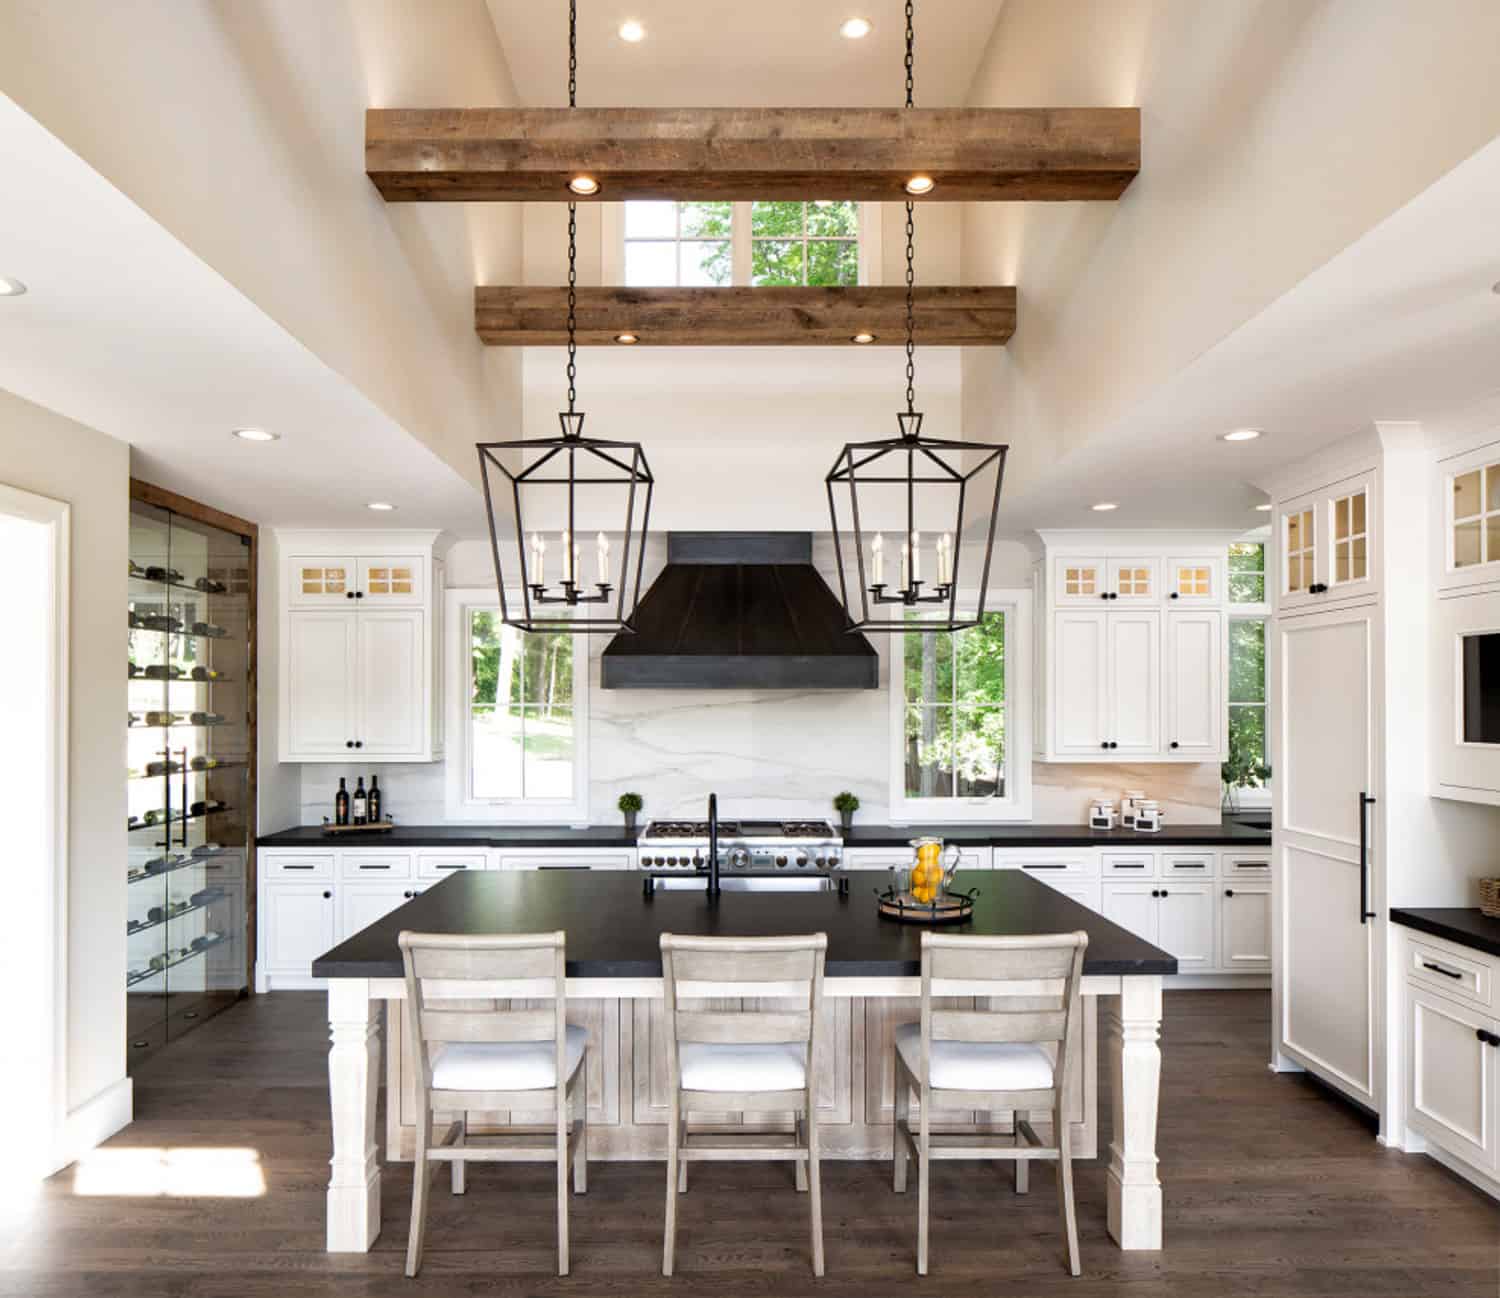 farmhouse-kitchen-with-wood-ceiling-beams-and-large-pendant-light-fixtures